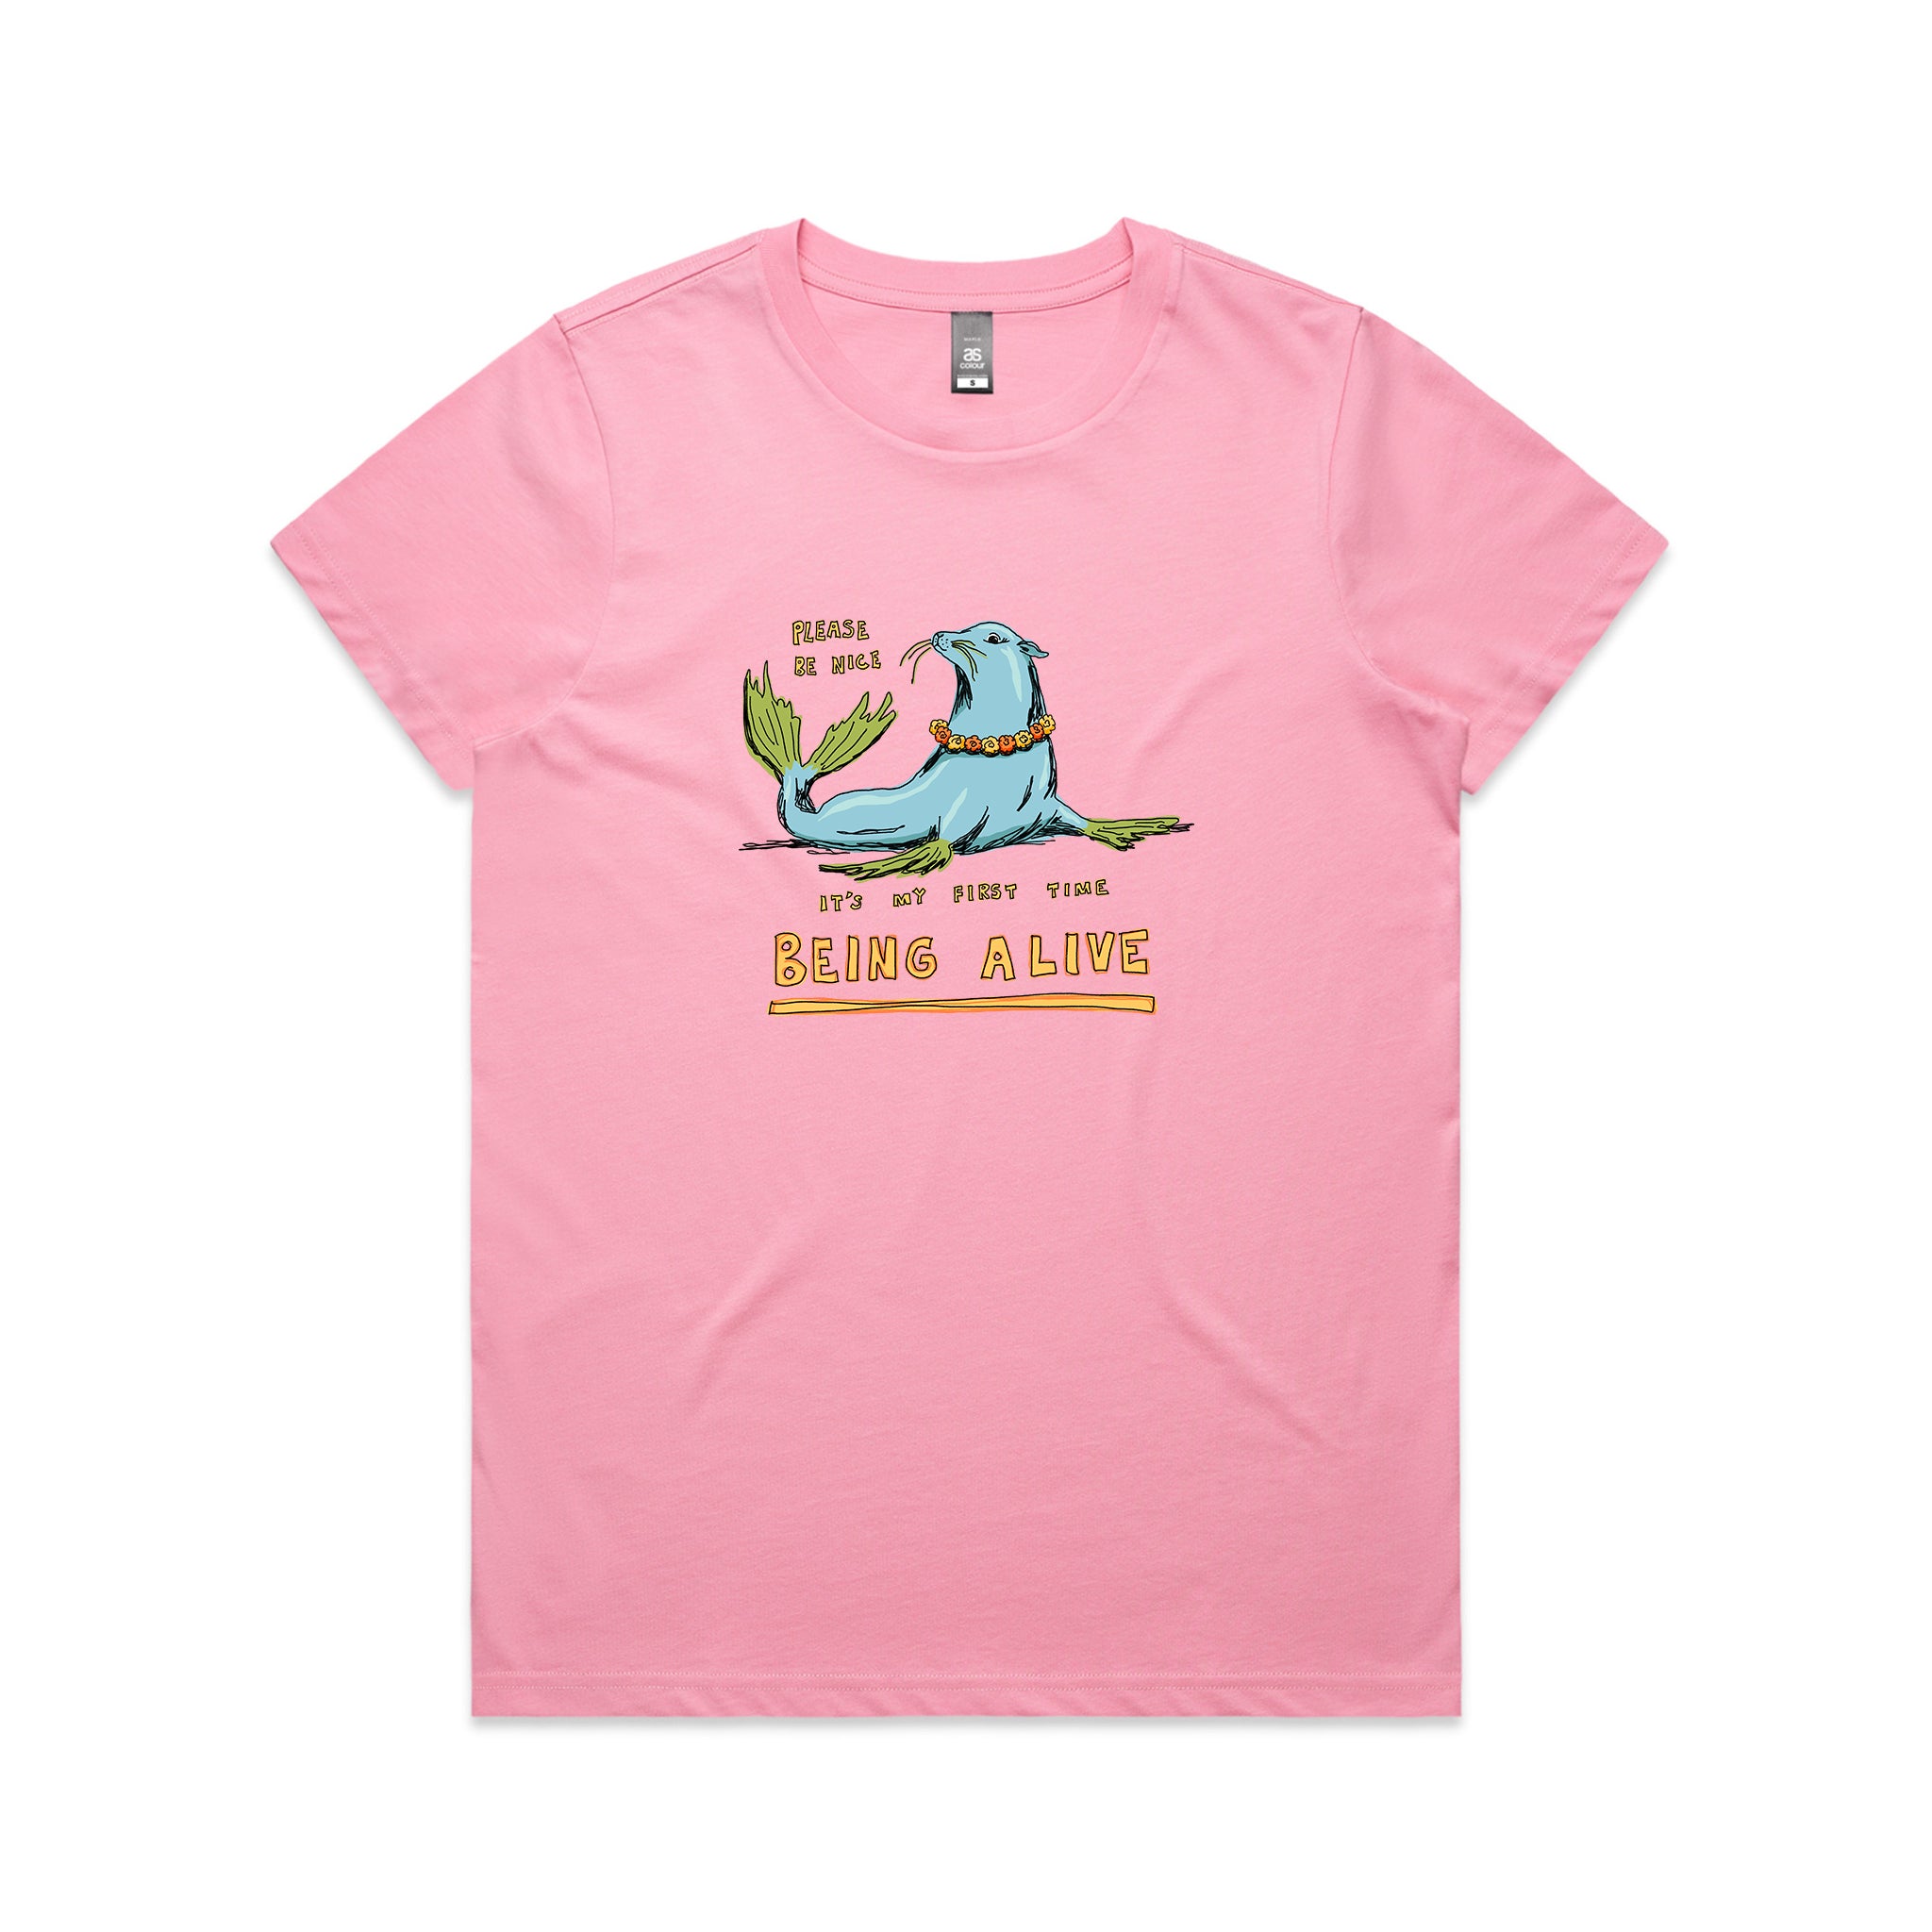 Being Alive Tee